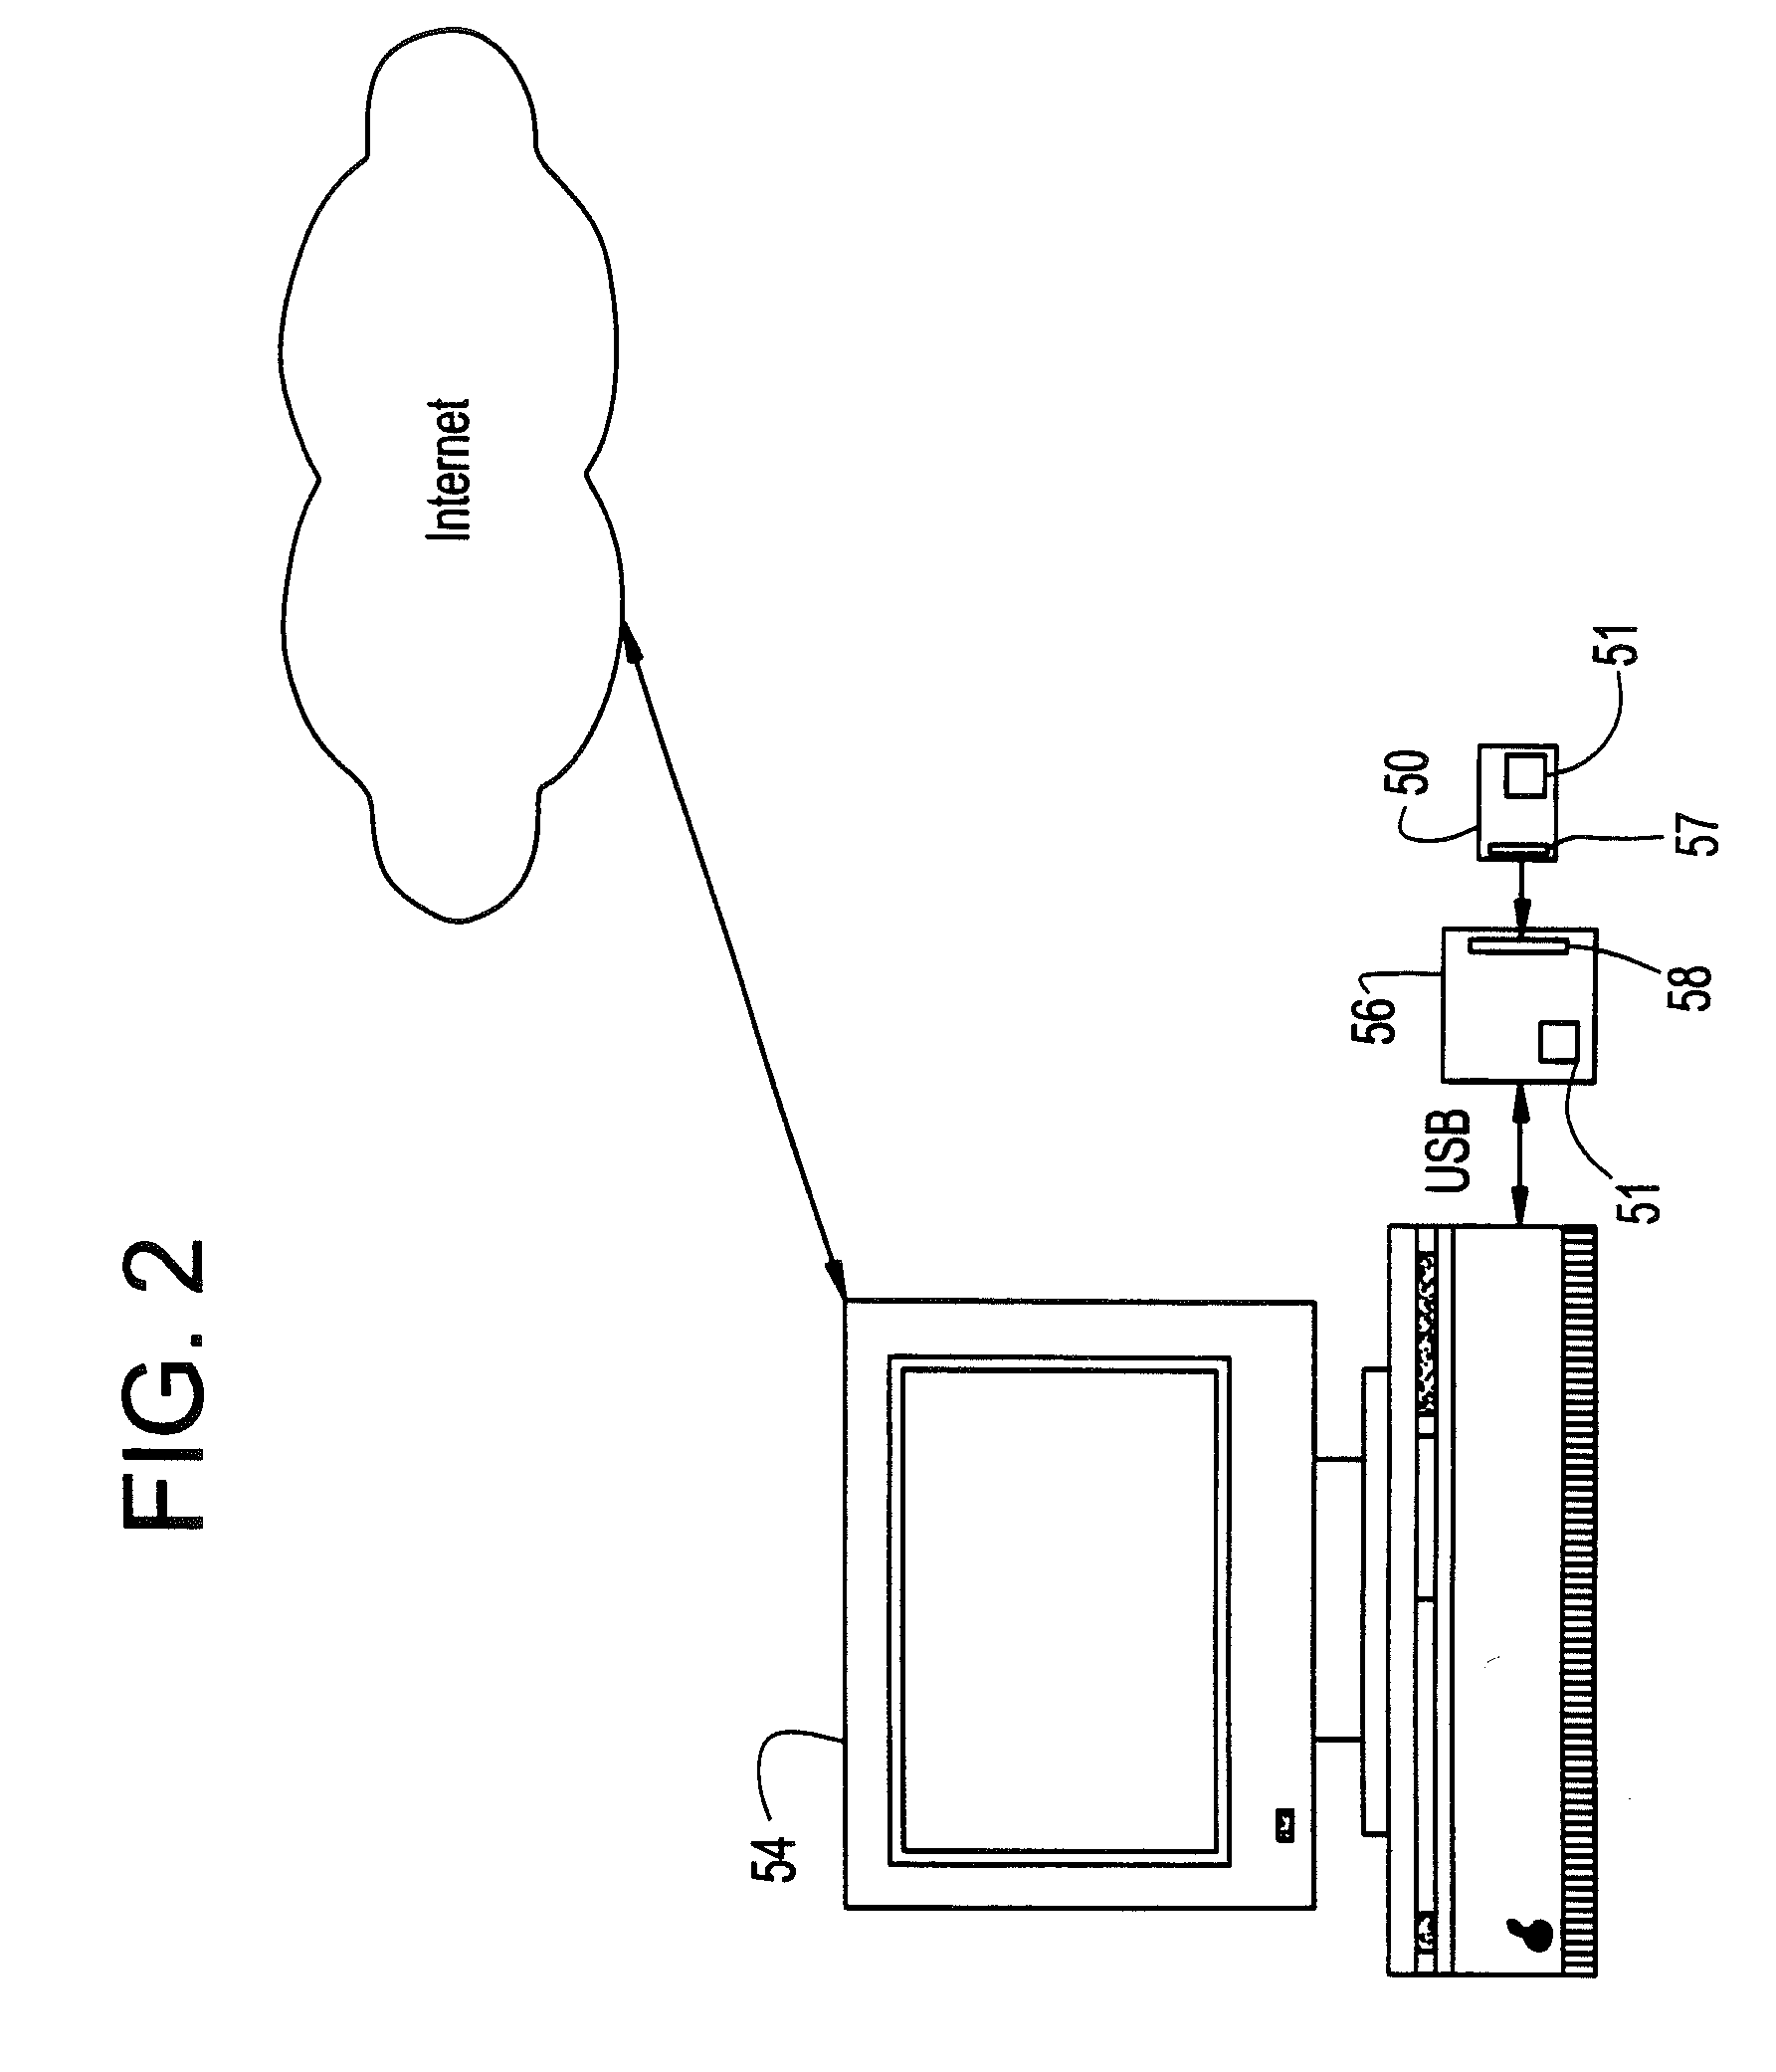 Method of using personal device with internal biometric in conducting transactions over a network